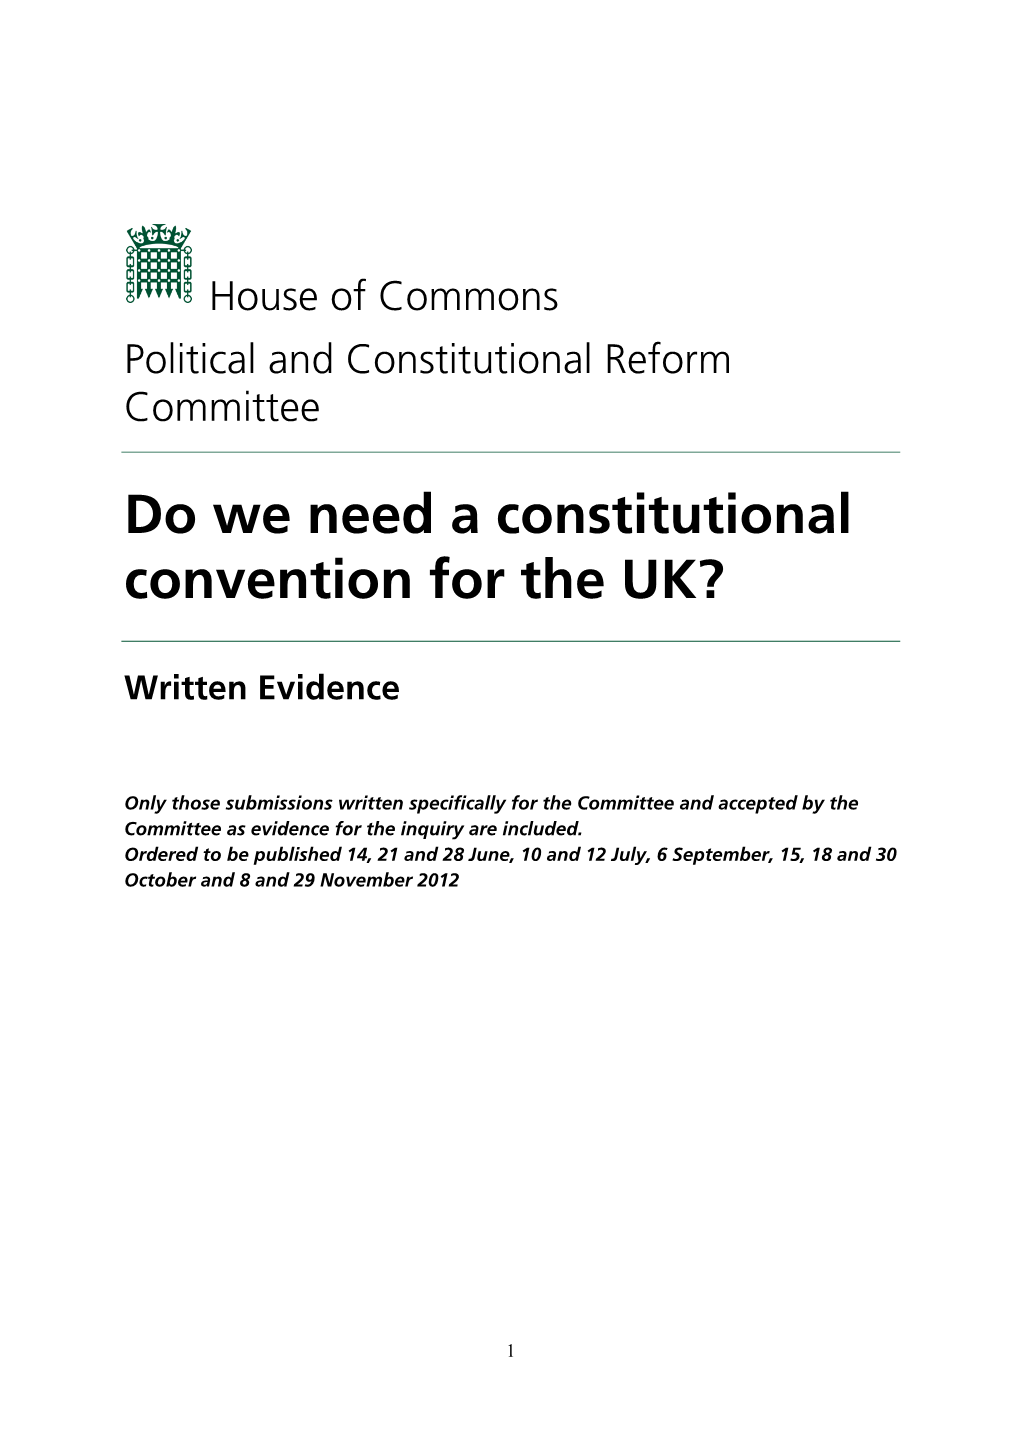 Do We Need a Constitutional Convention for the UK?